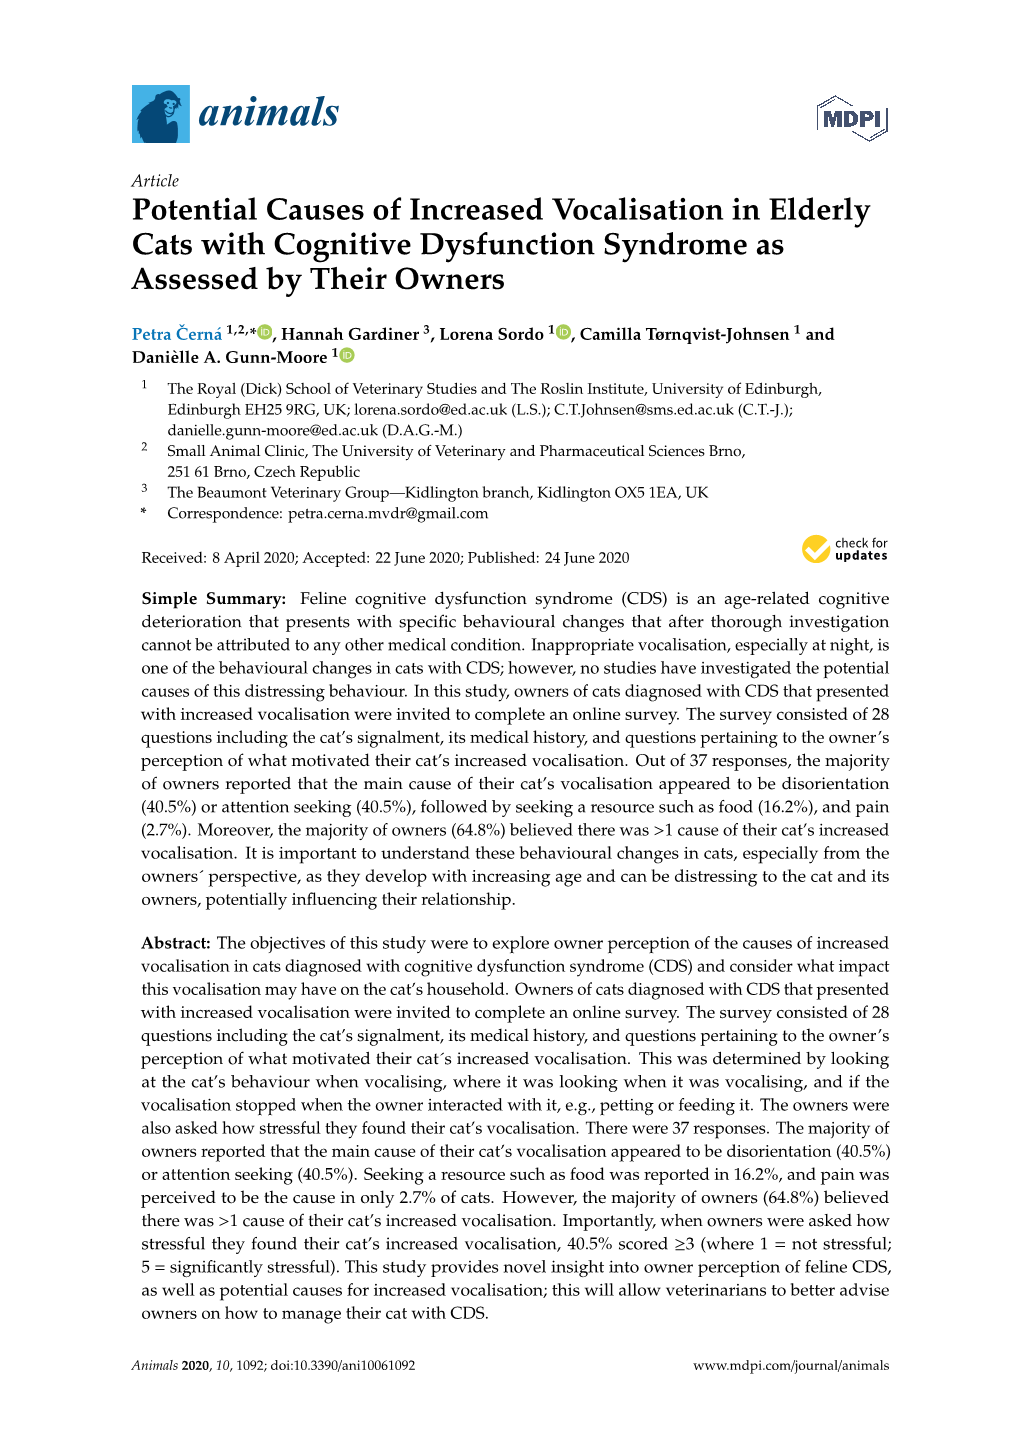 Potential Causes of Increased Vocalisation in Elderly Cats with Cognitive Dysfunction Syndrome As Assessed by Their Owners